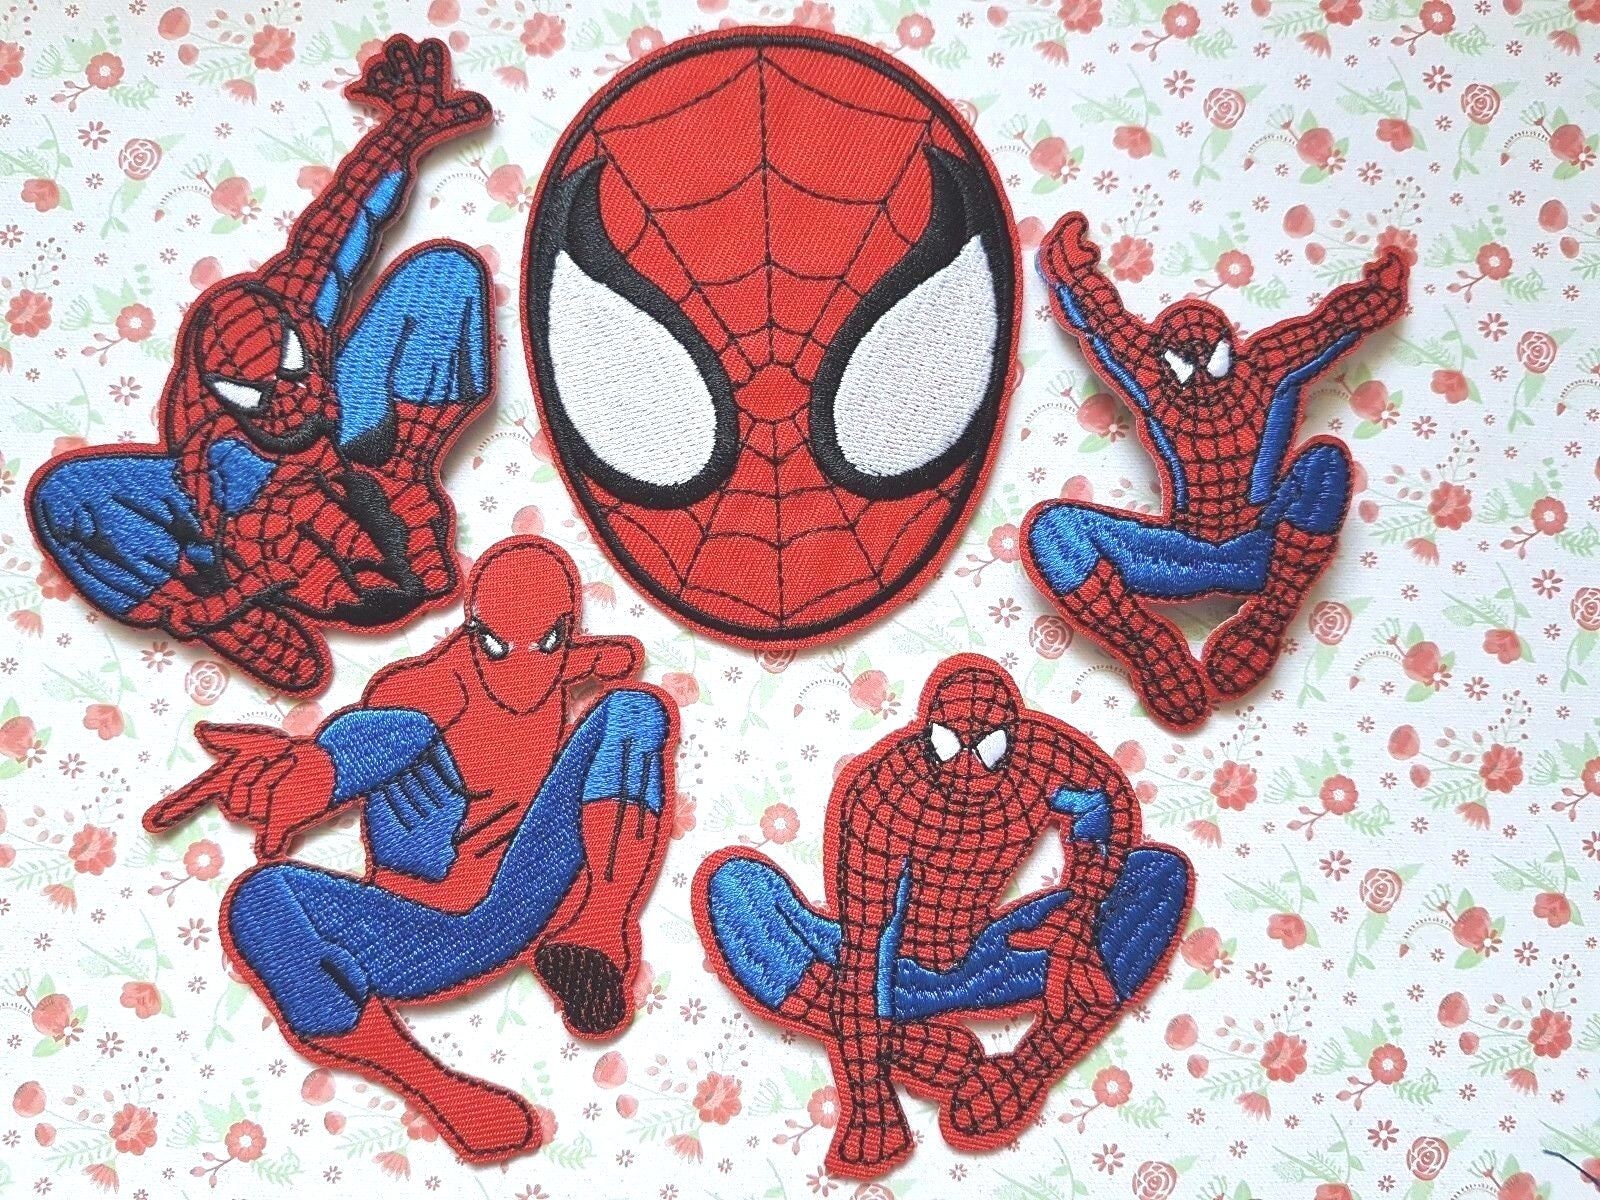 The Amazing Spiderman Iron-On Patches for Clothing DIY Sew On